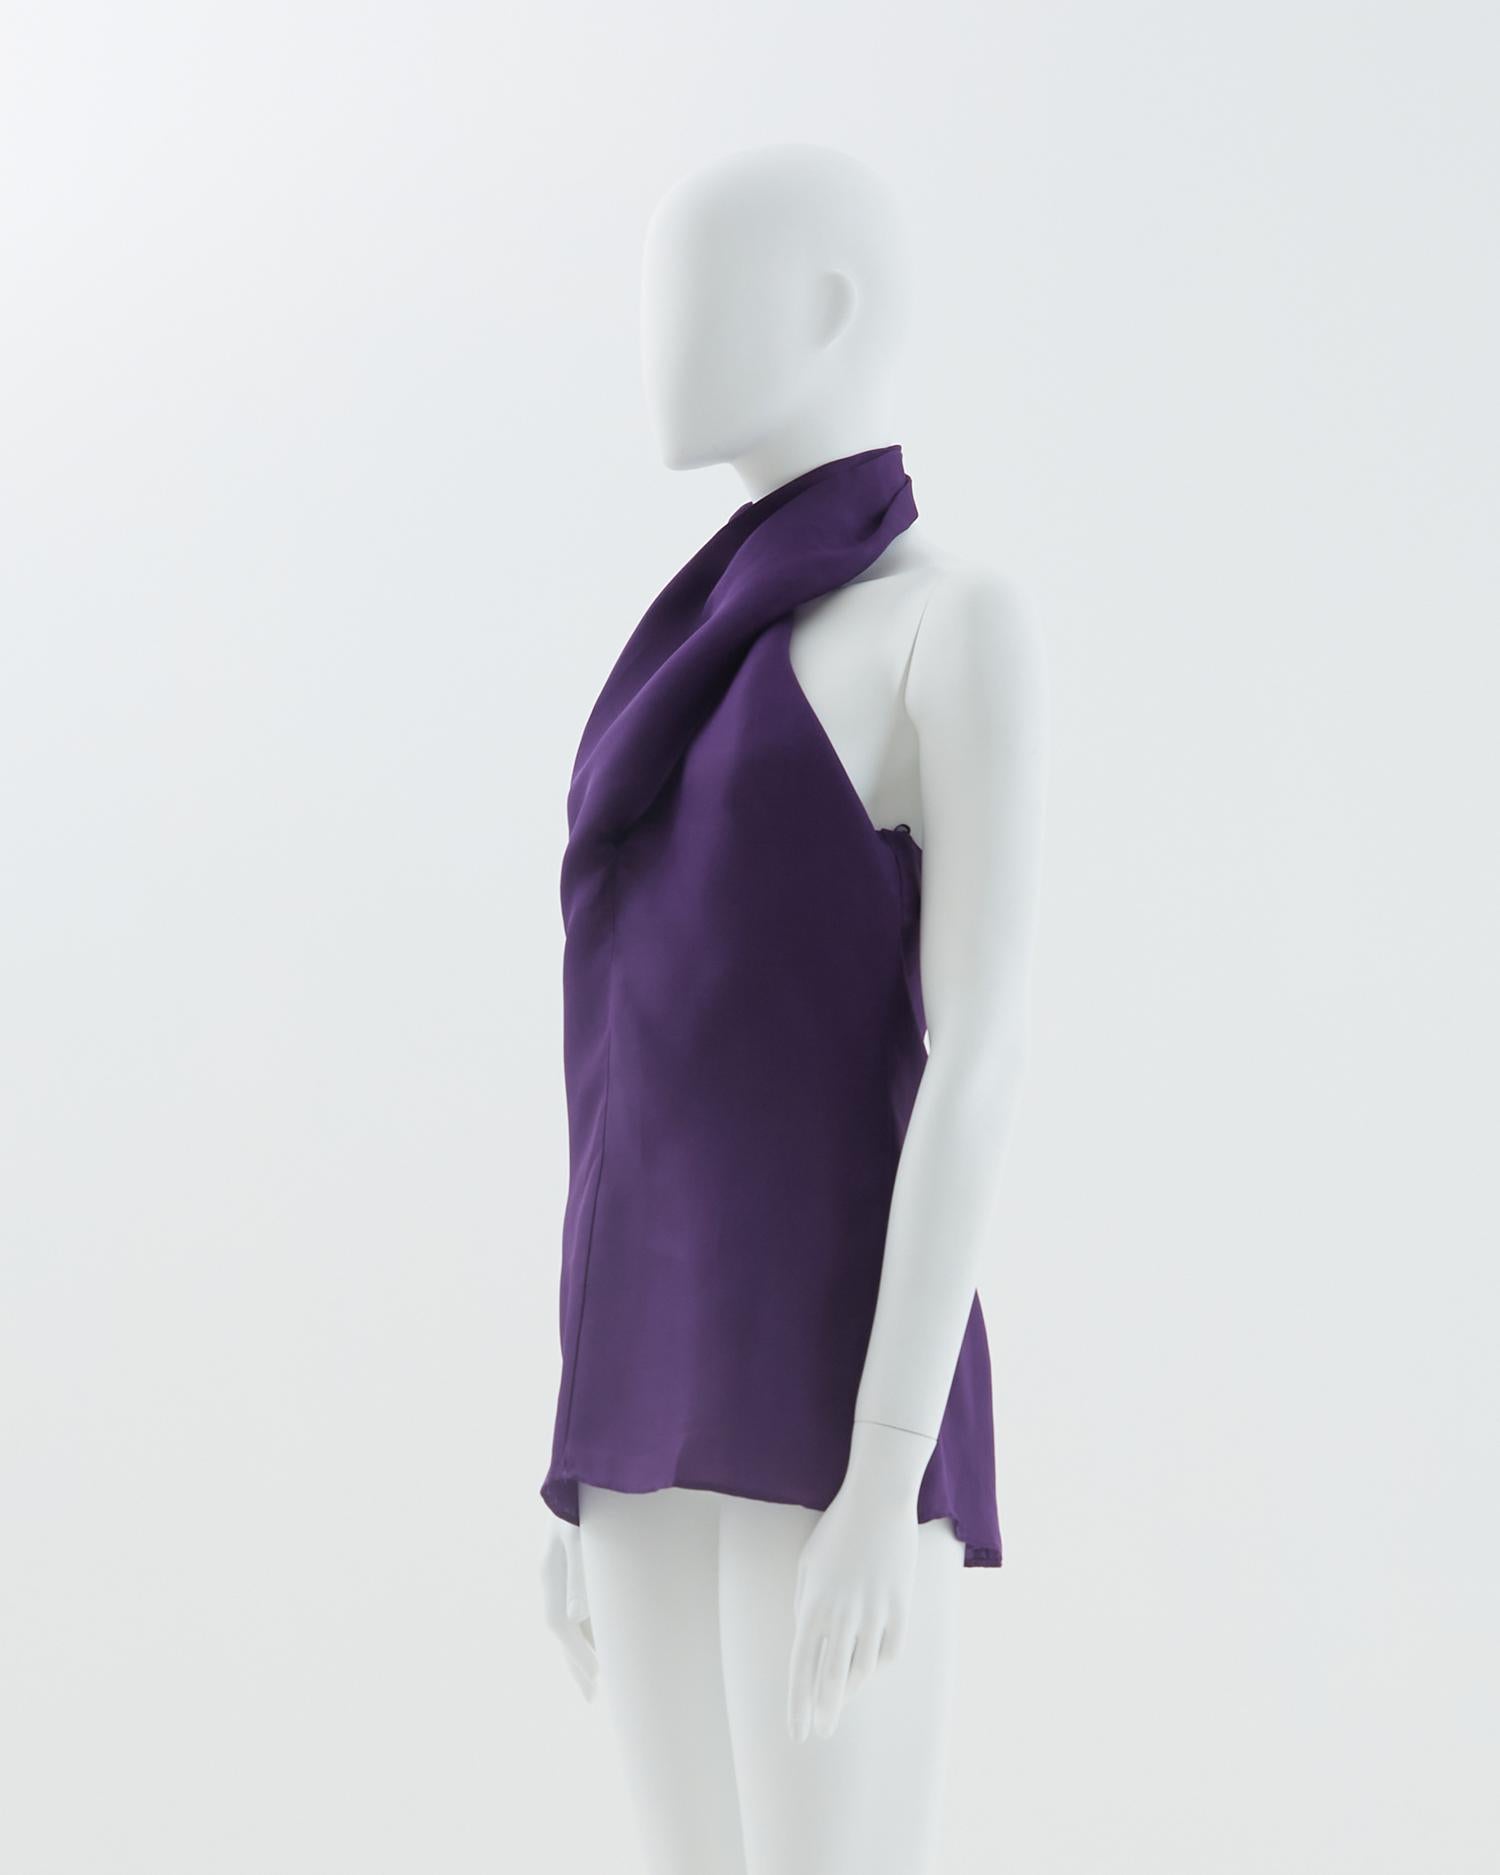 -  Designed by Stefano Pilati 
- Sold by Skof.Archive
- Runway look 12
- Purple organza silk halter top 
- Open back 
- Concealed zip back closure 
- Spring Summer 2012 
- Removed size label 

Size 
Approx
FR 38 - IT 42 - UK 10 - US 8